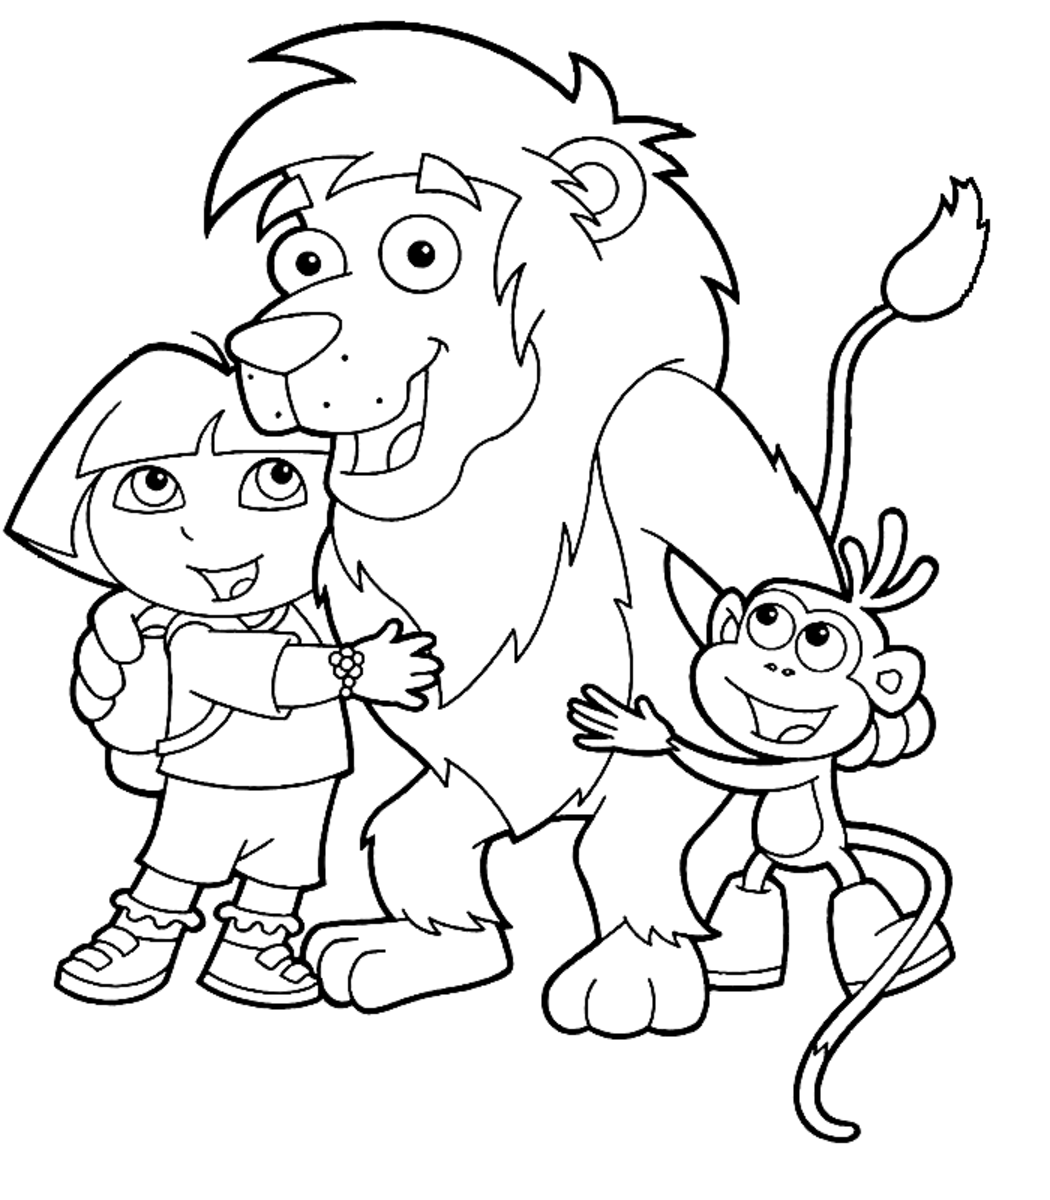 Dora the Explorer Printable Coloring Pages | hubpages